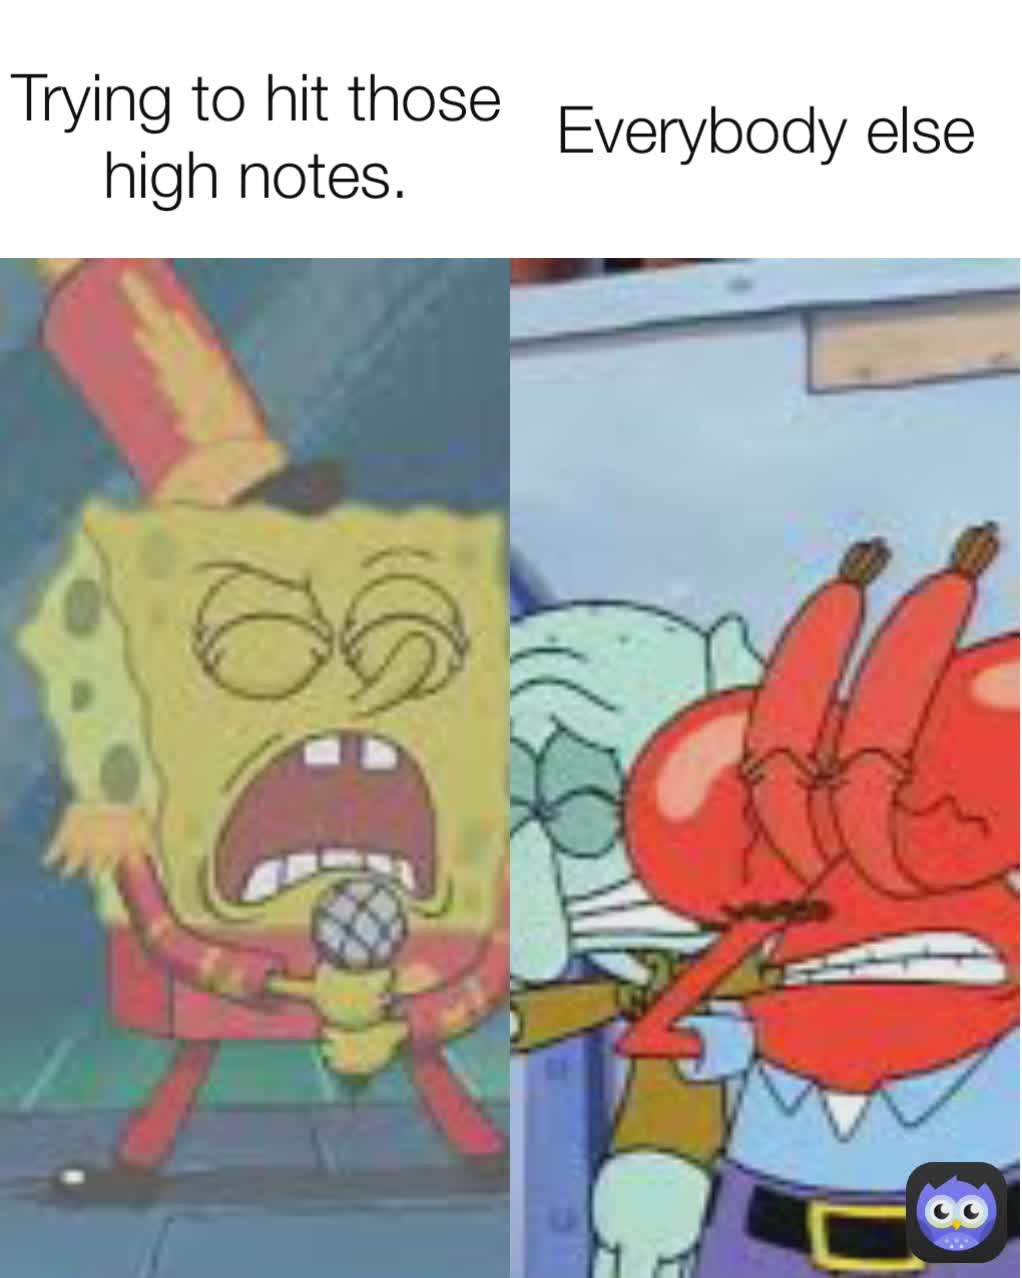 Everybody else Trying to hit those high notes.